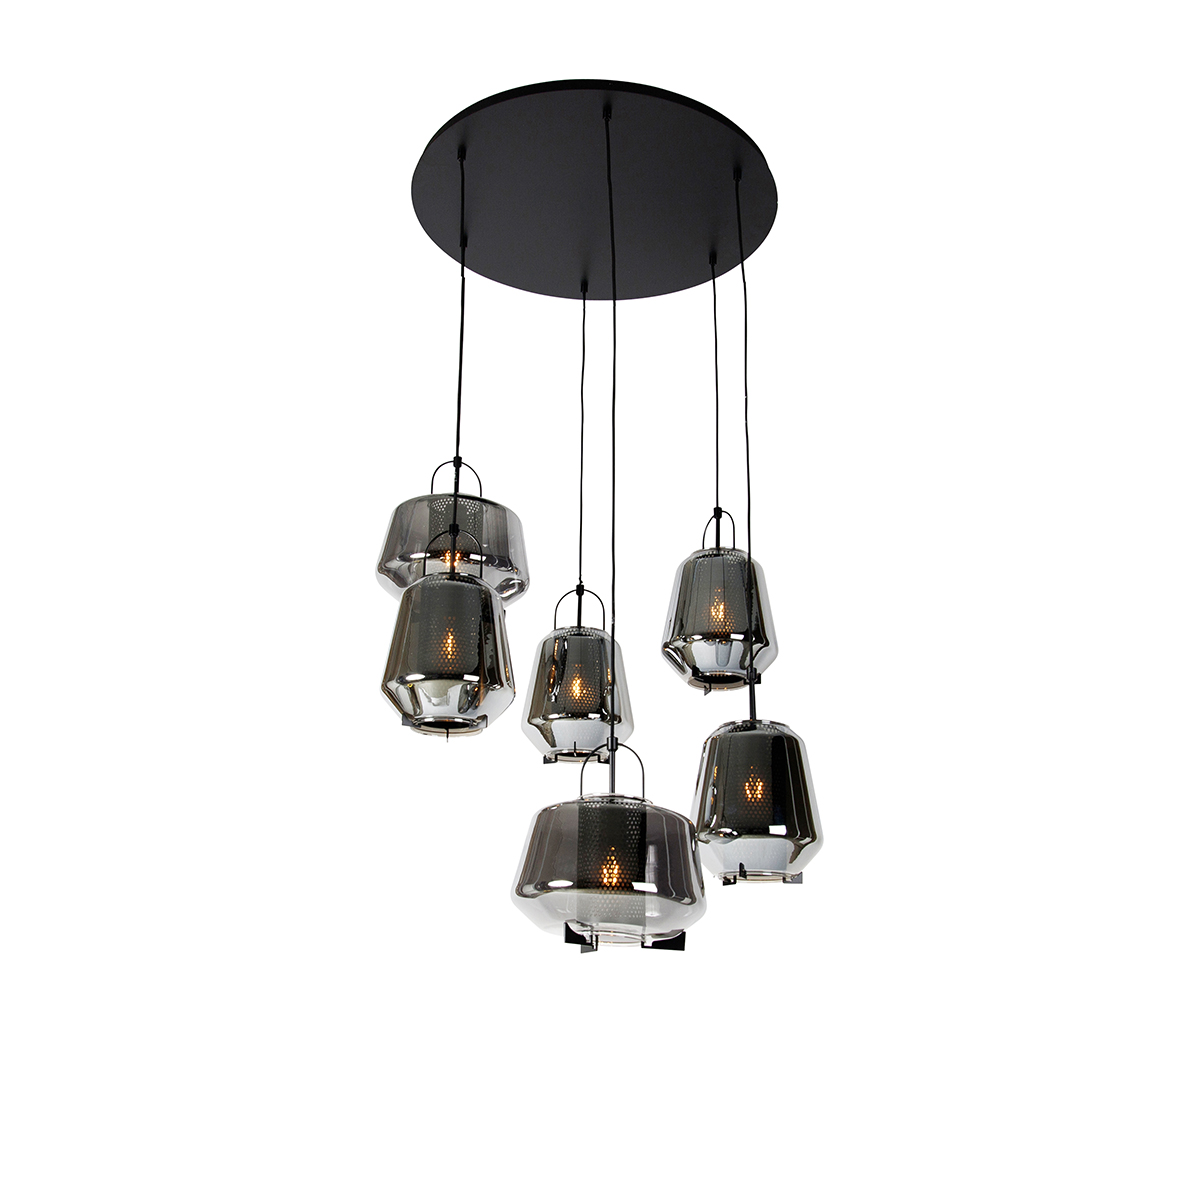 Art deco hanging lamp black with smoke glass 6 lights - Kevin